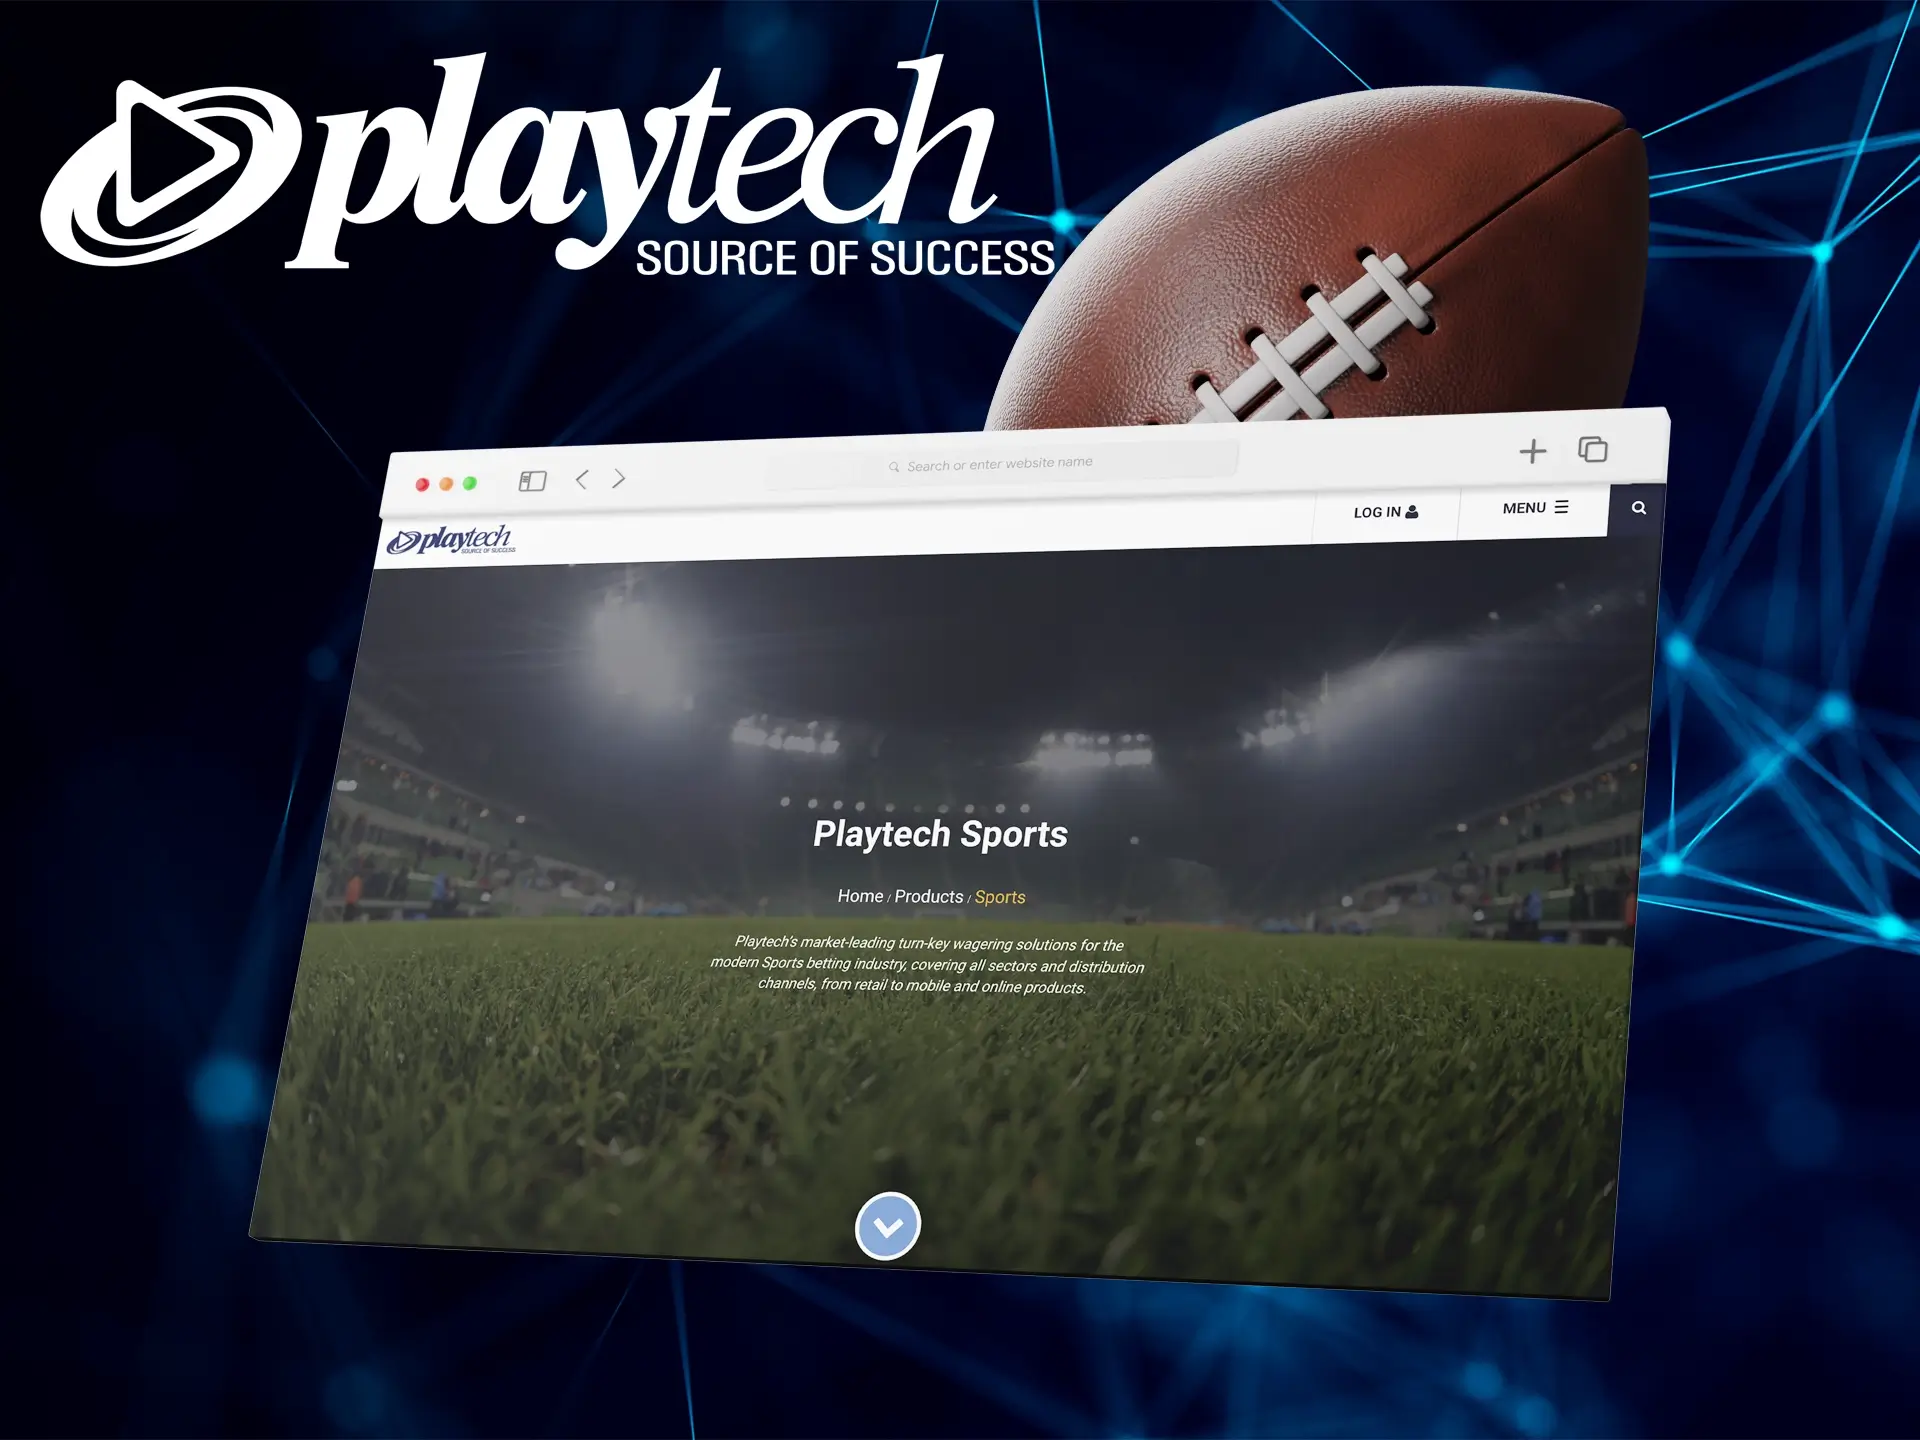 Try out Playtech's sports products.